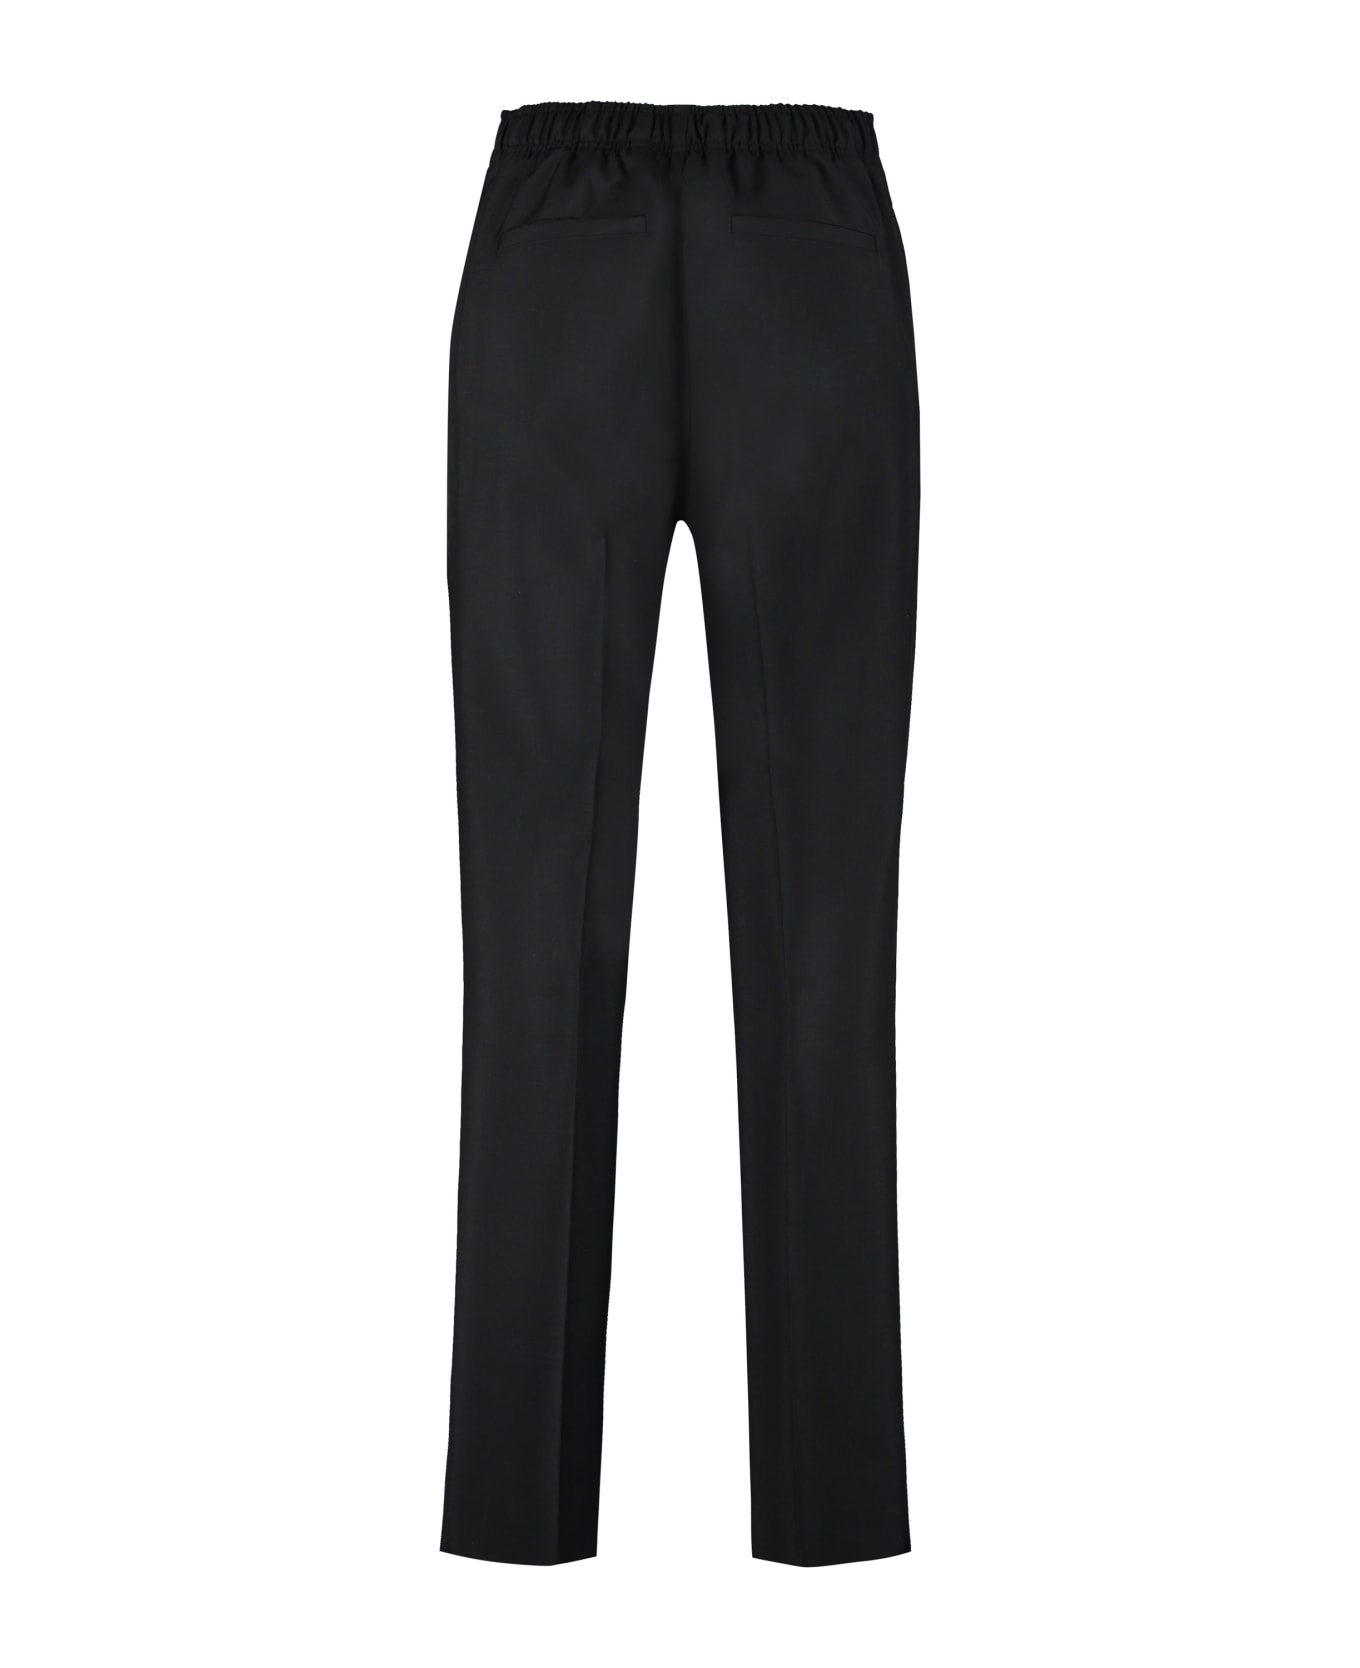 Givenchy Tailored Wool Trousers - BLACK ボトムス